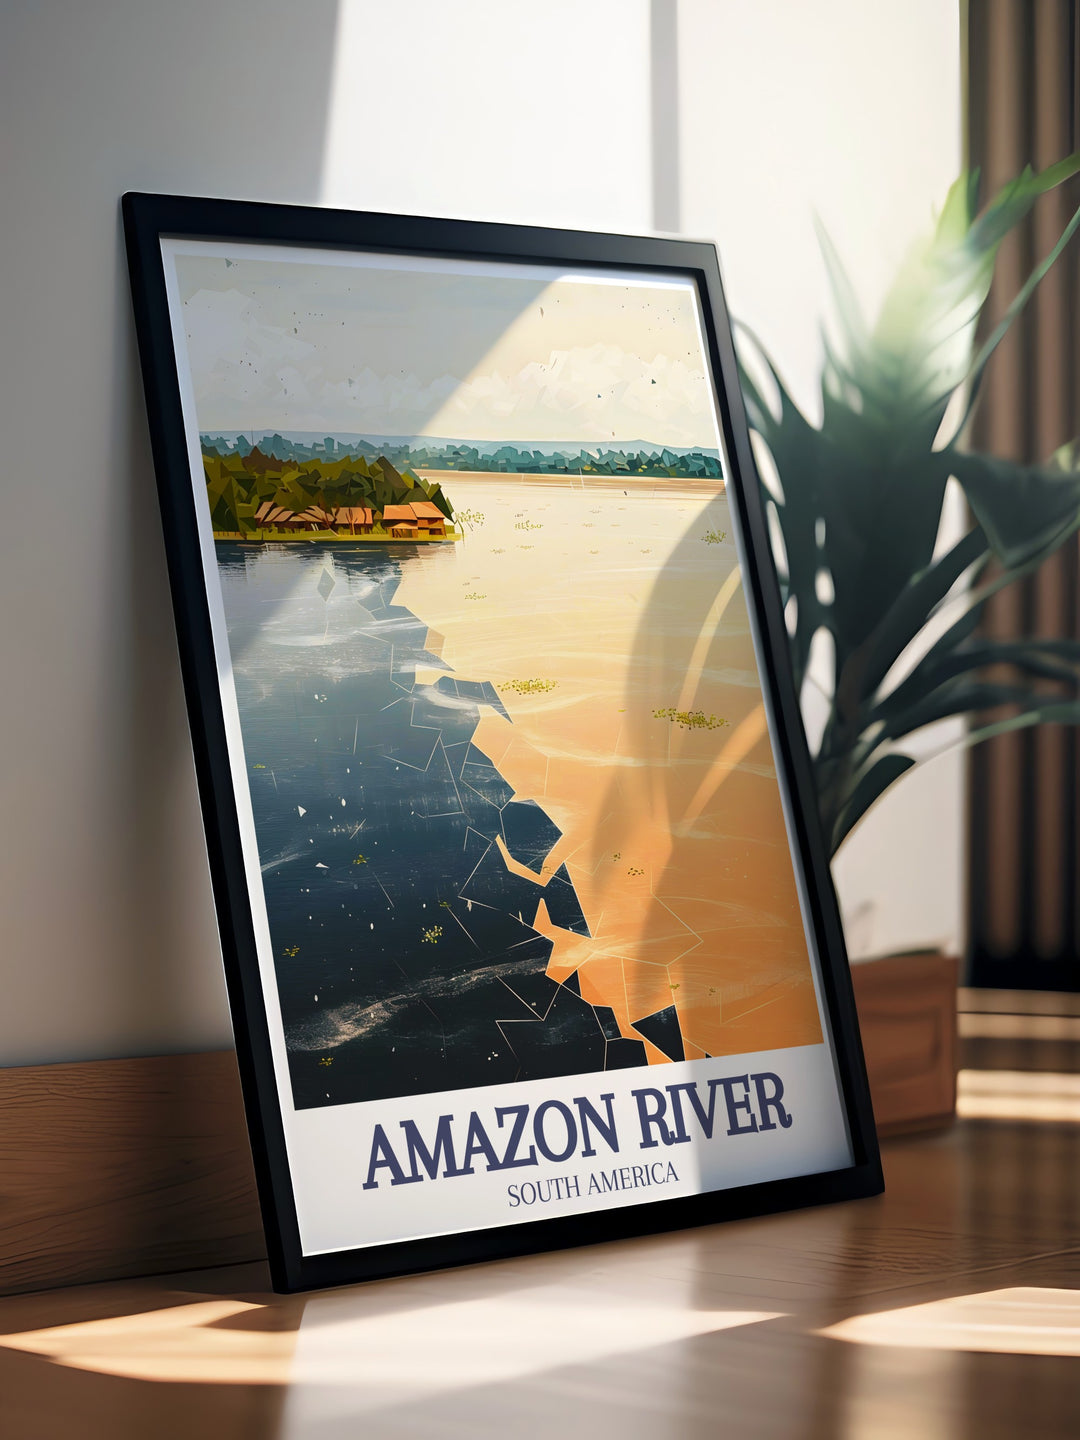 Enhance your home decor with the Encontro das Aguas, Rio Negro and Solimoes rivers wall art. This stunning print combines vintage charm and modern design elements, creating a timeless piece that celebrates the unique confluence of these iconic rivers.